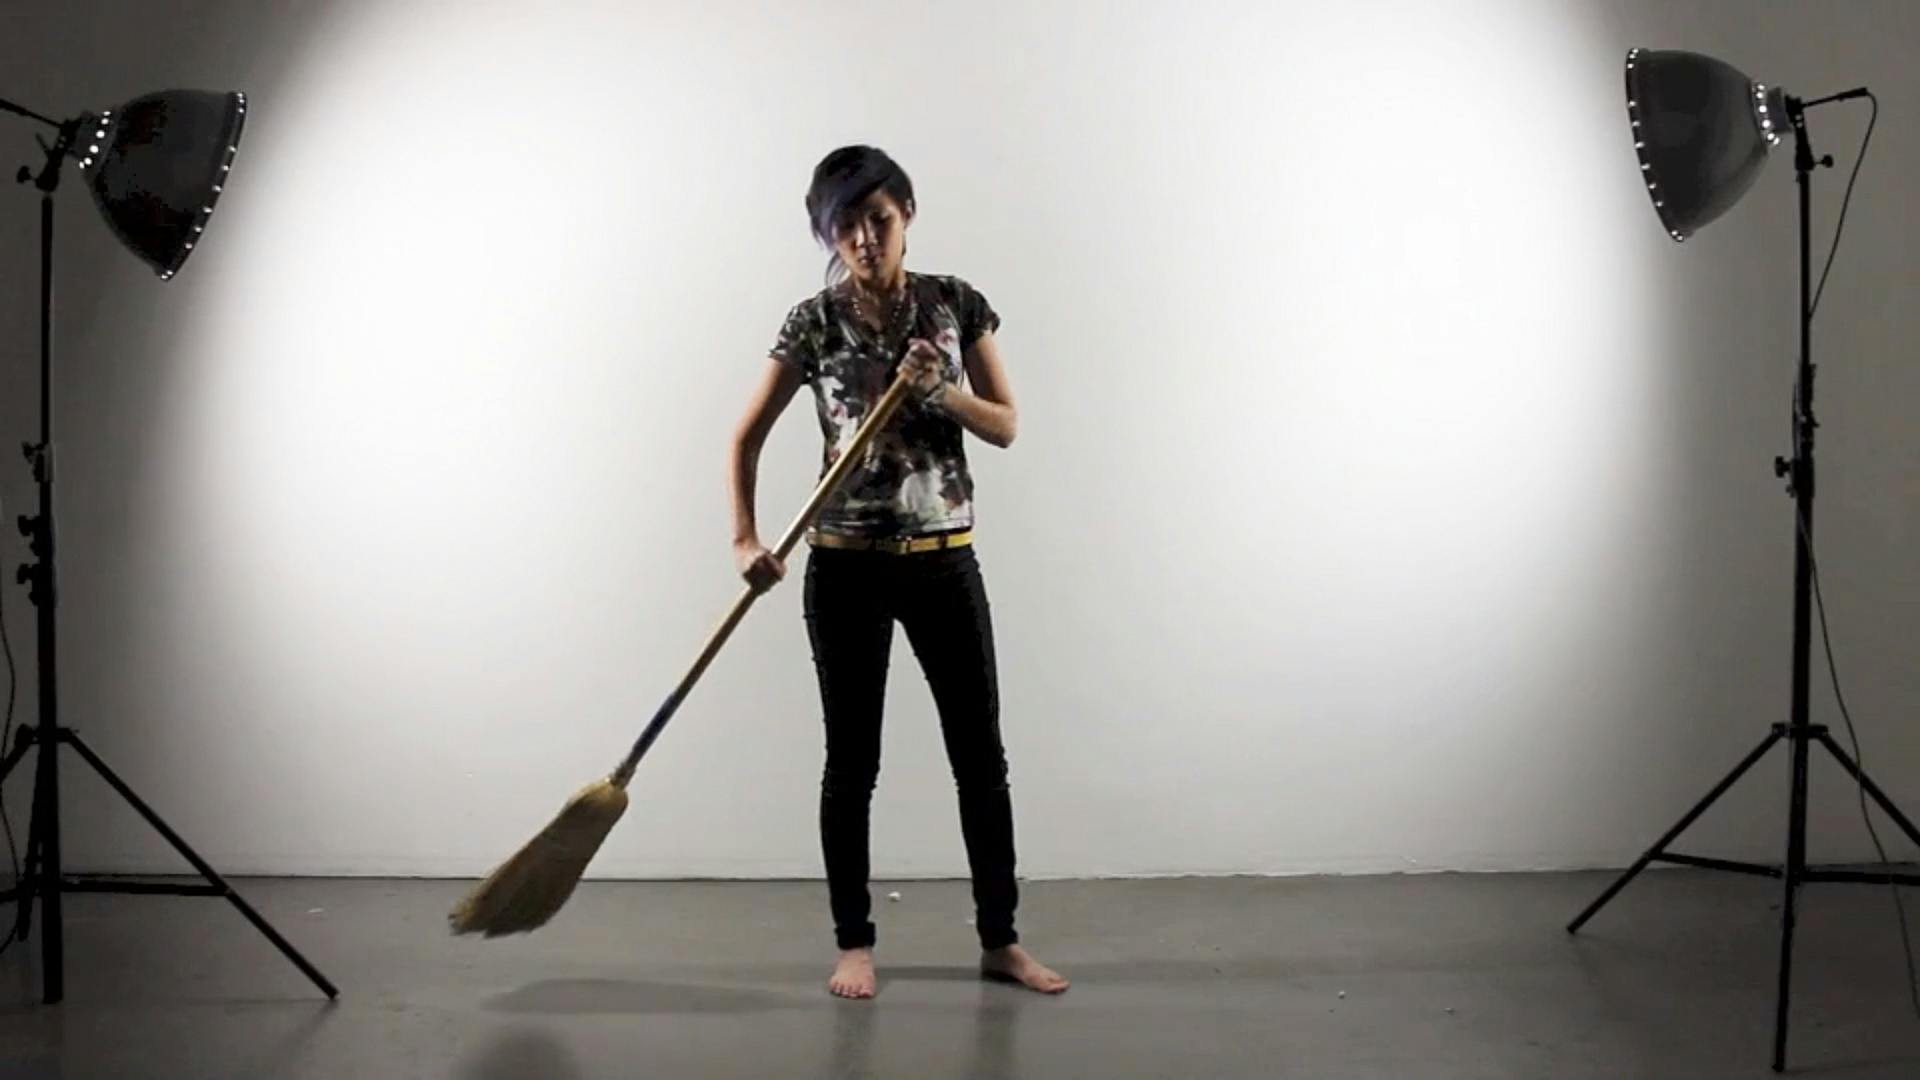 Still image from a video. A person wearing a grey shirt and a pair of black pants stands on a concrete floor between spotlights, sweeping with a long broom. 